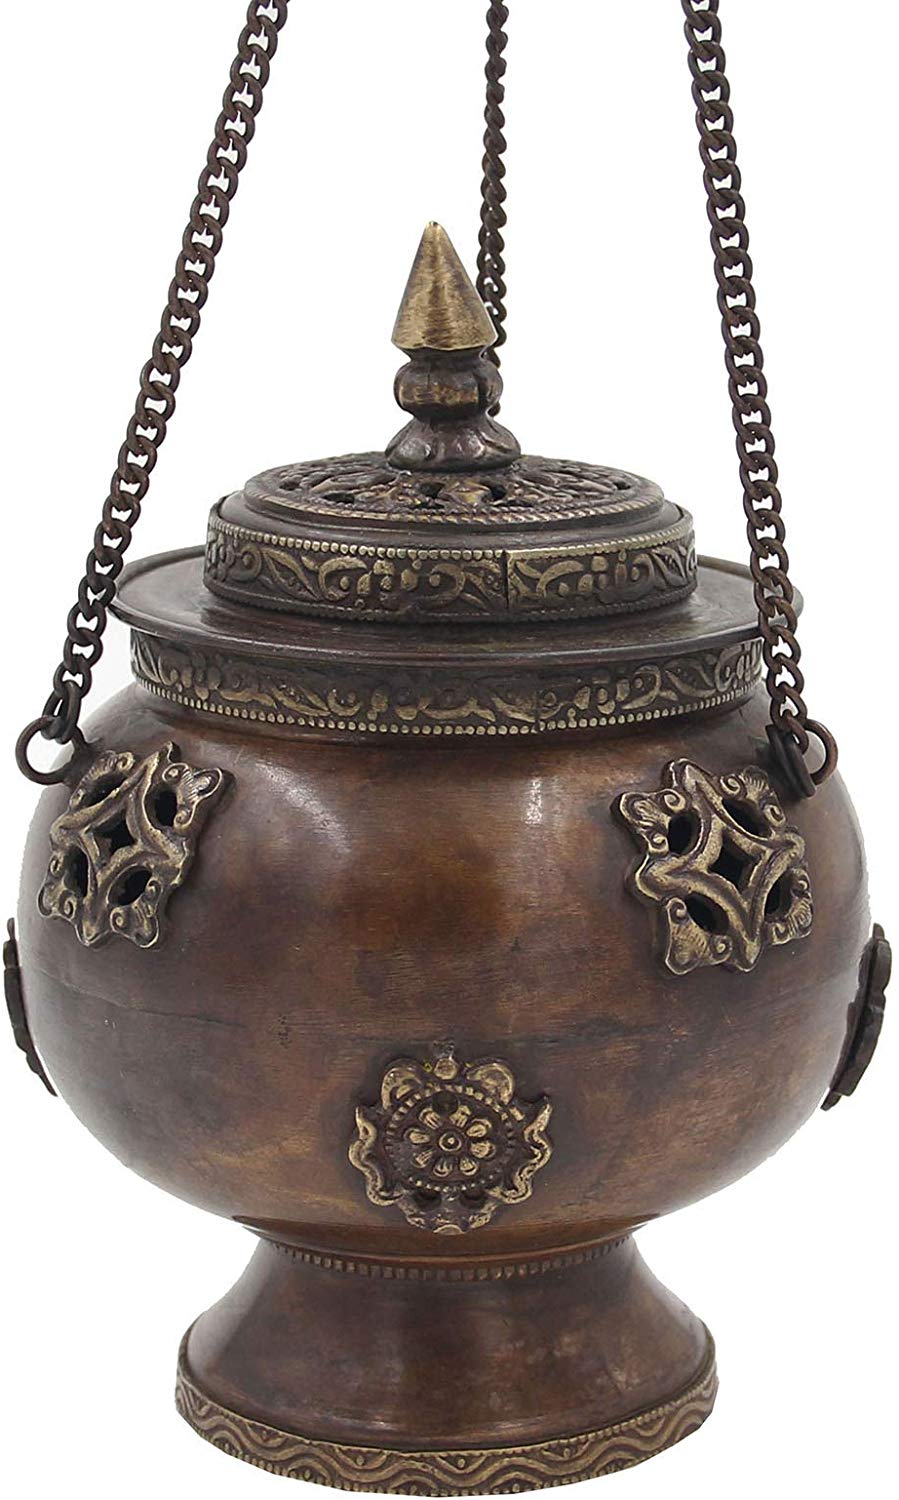 Tibetan Traditional Hanging Incense Burner Copper (6 x 4.5 x 4.5 Inches, Hanging 8) - DharmaObjects